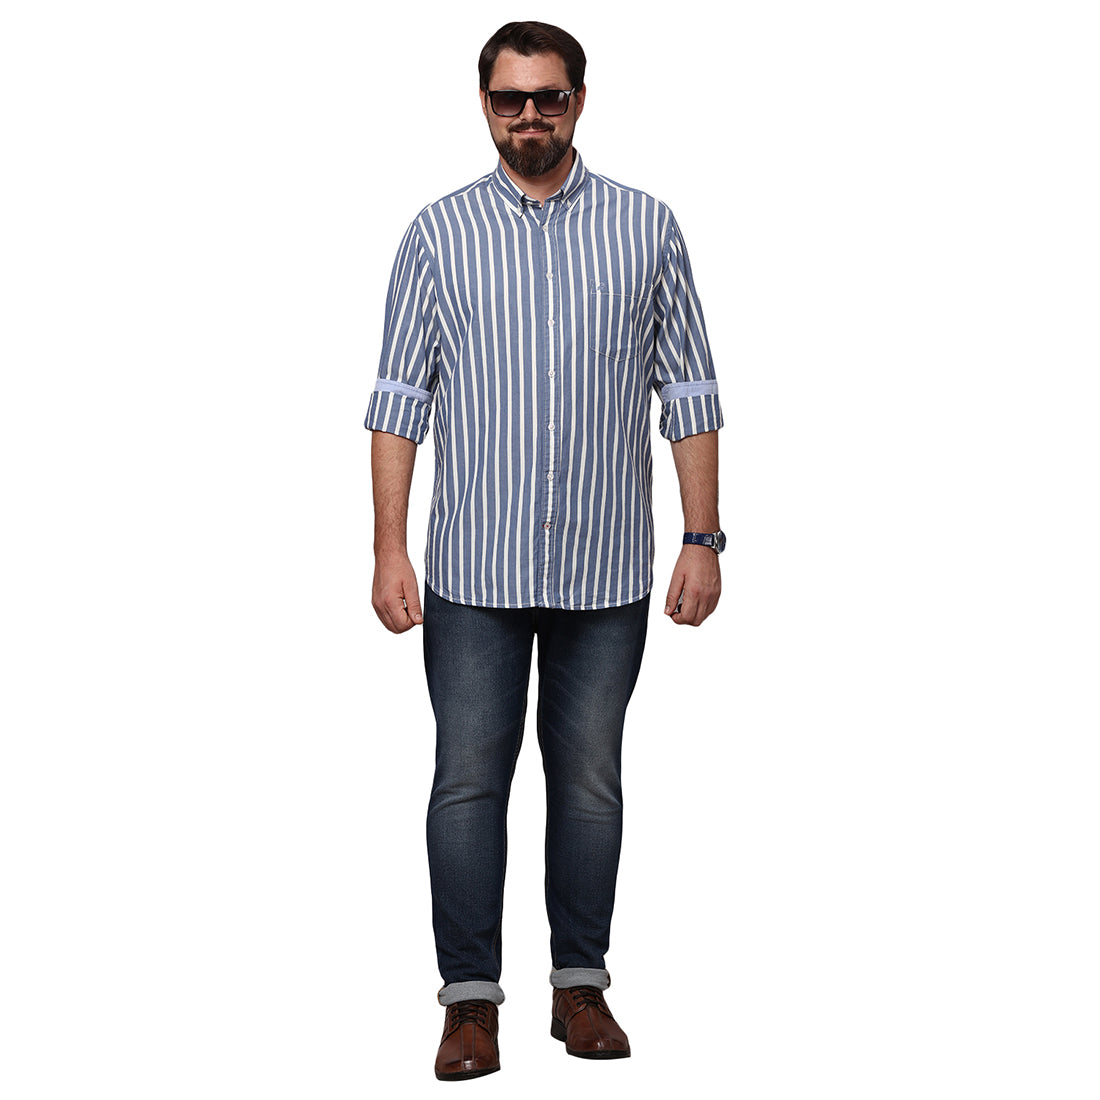 Big & Bold Stripes Blue Full Sleeves Slim Fit Casual Shirts (Plus Size) - Double Two